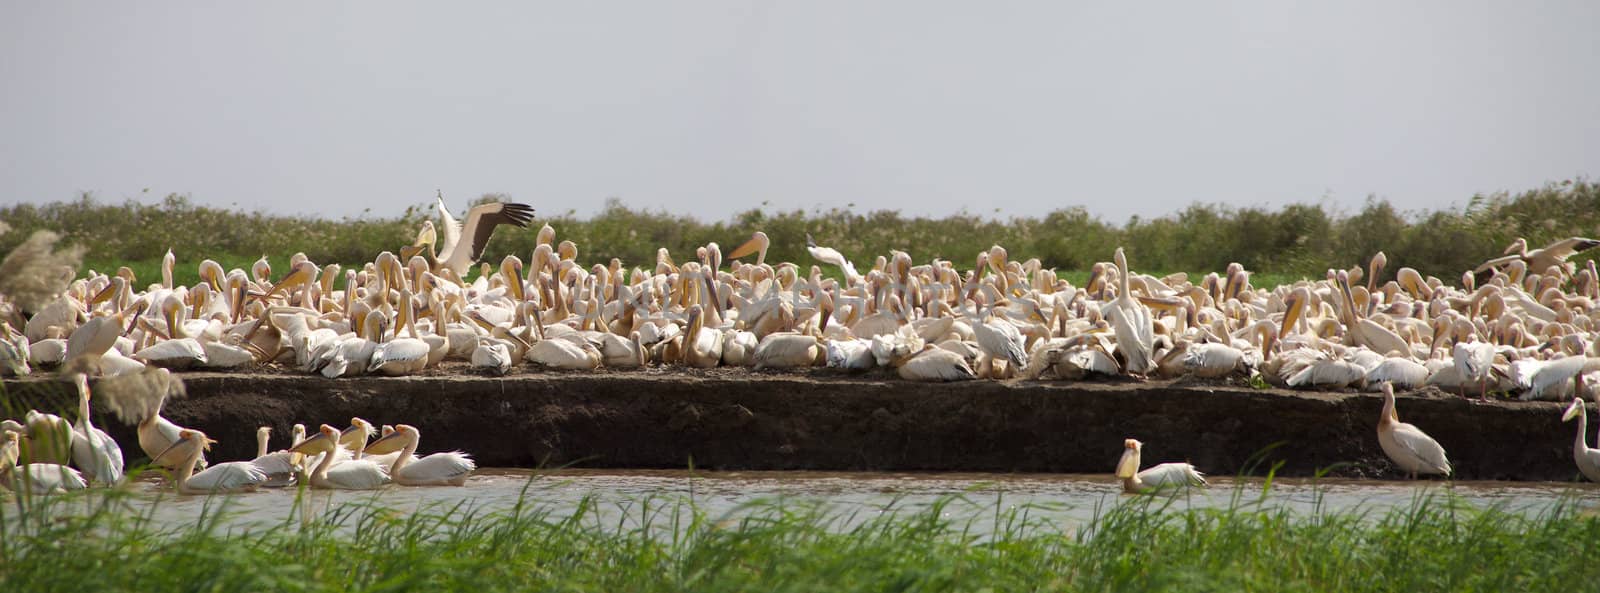 Pelicans in the Djoudj National park by watchtheworld